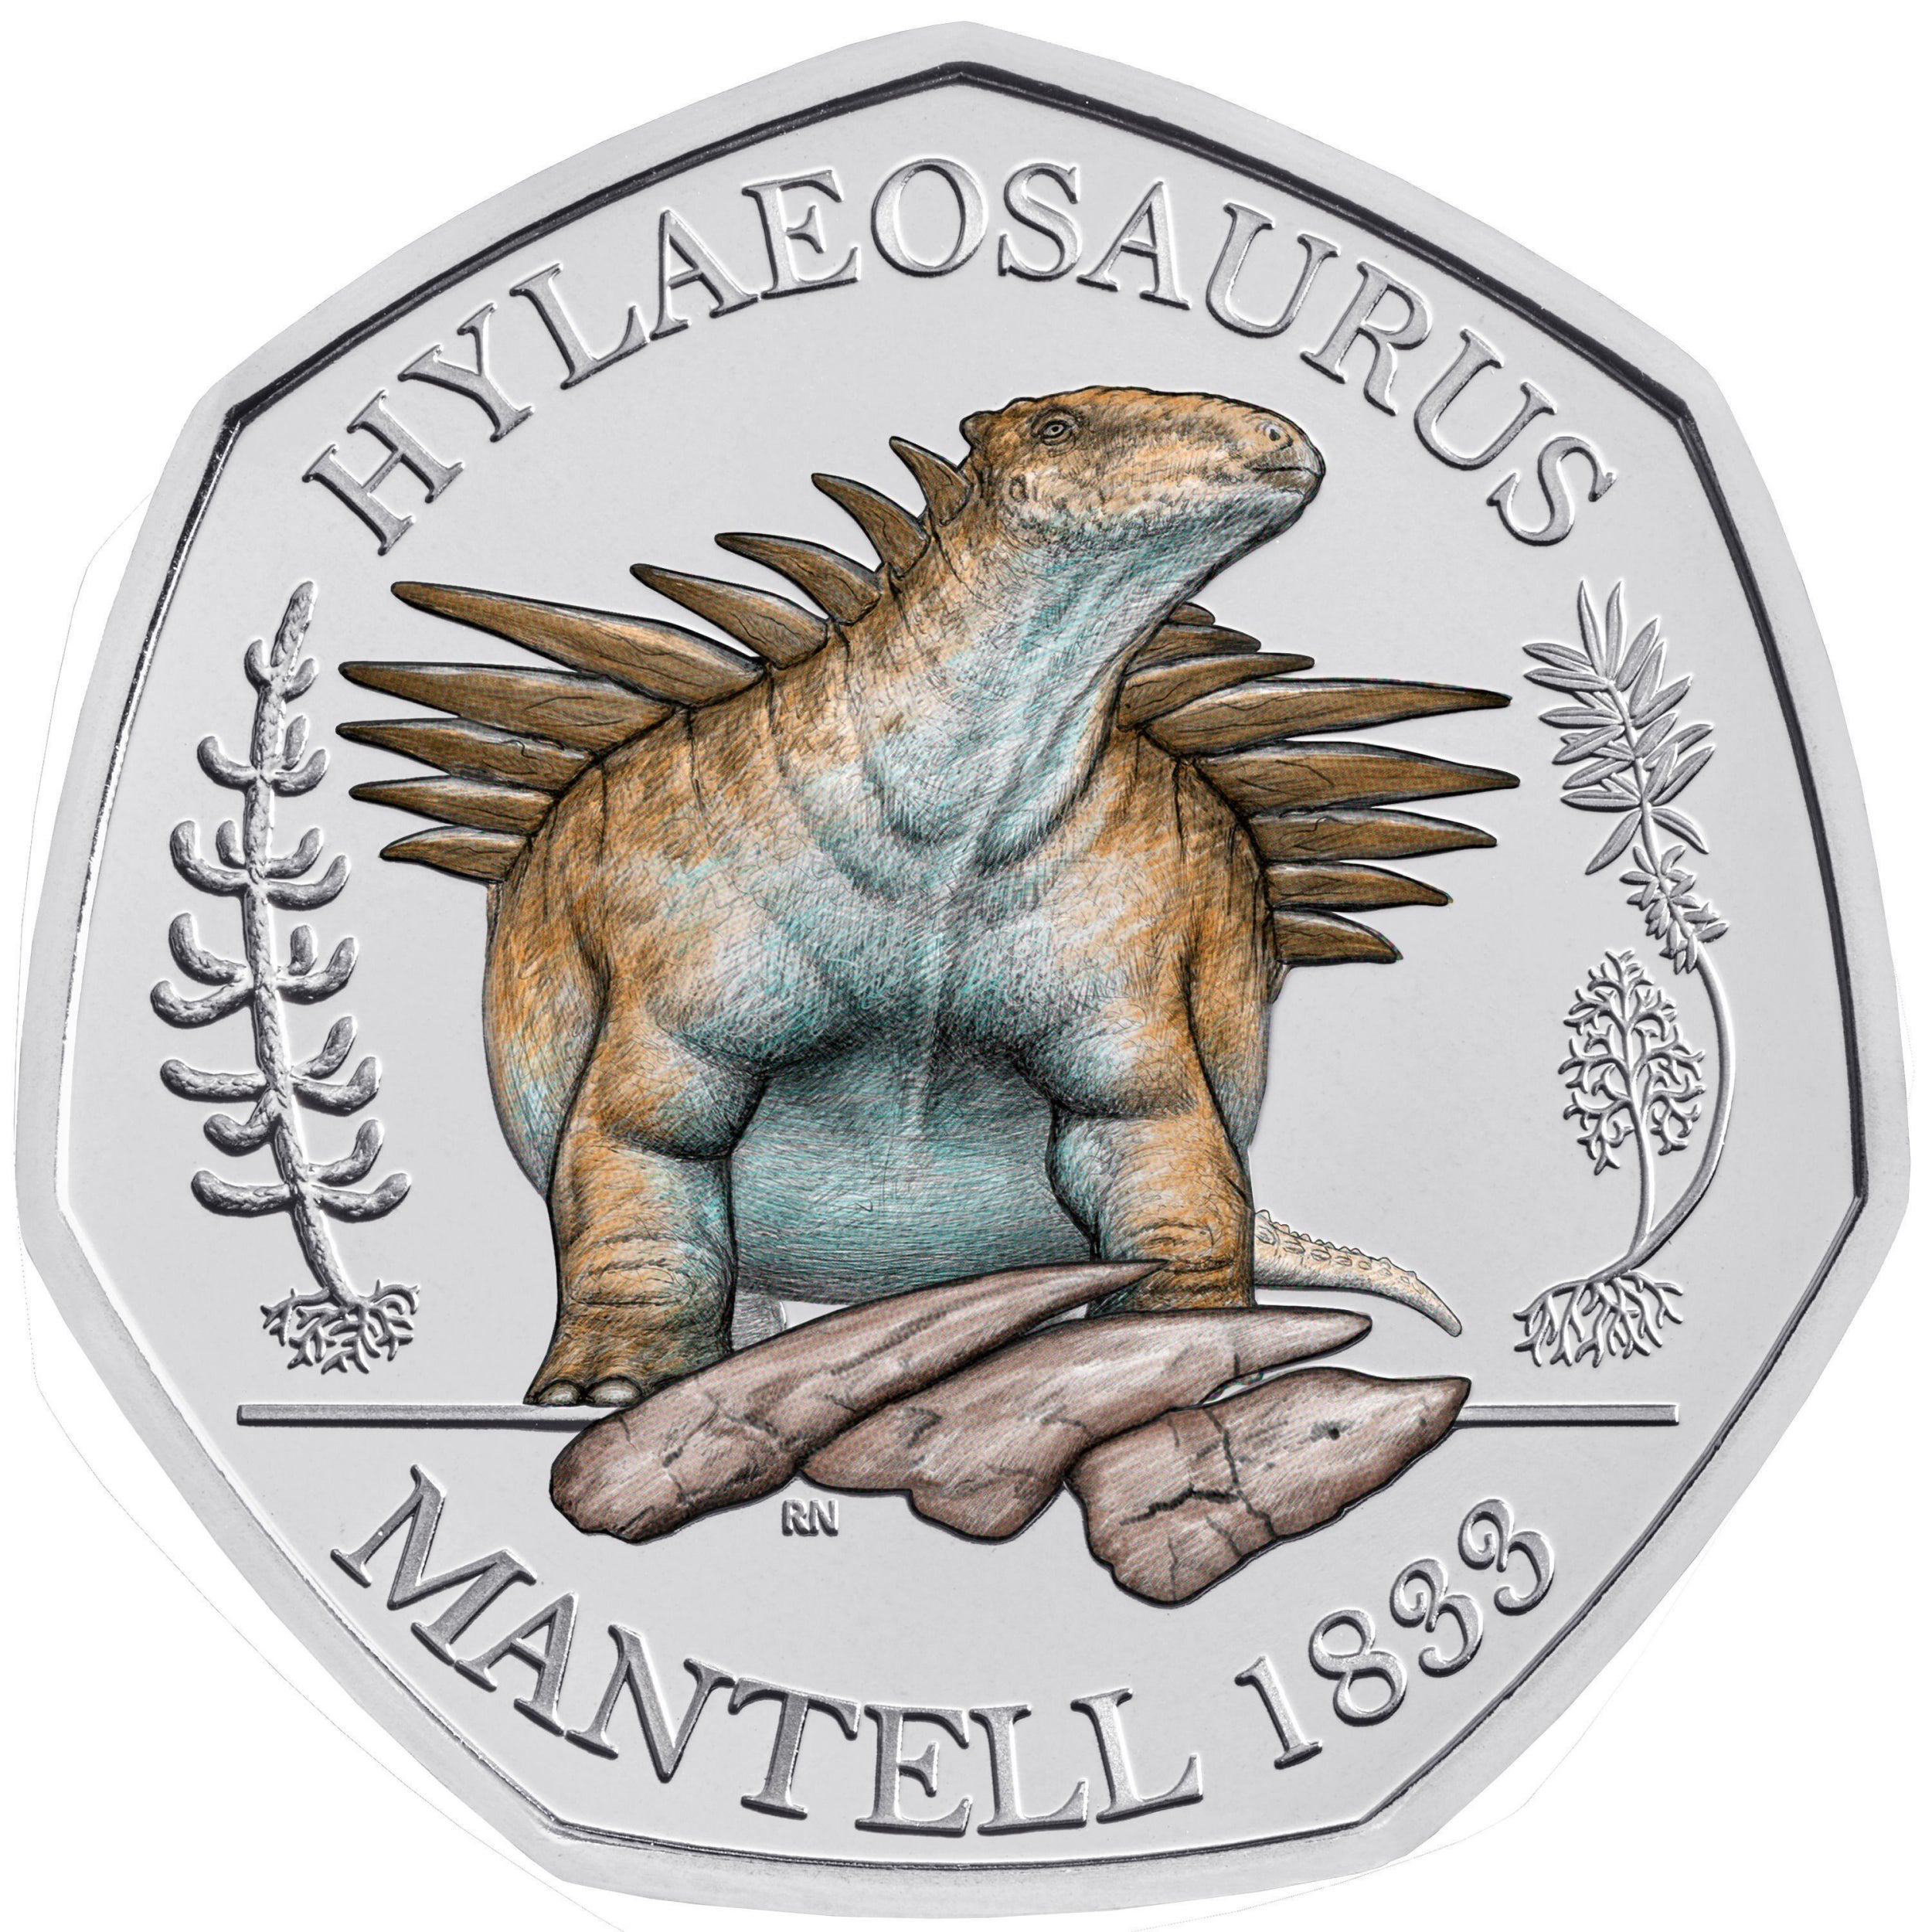 A commemorative 50 pence coin from the Royal Mint Dinosauria Collection which shows a Hylaeosaurus